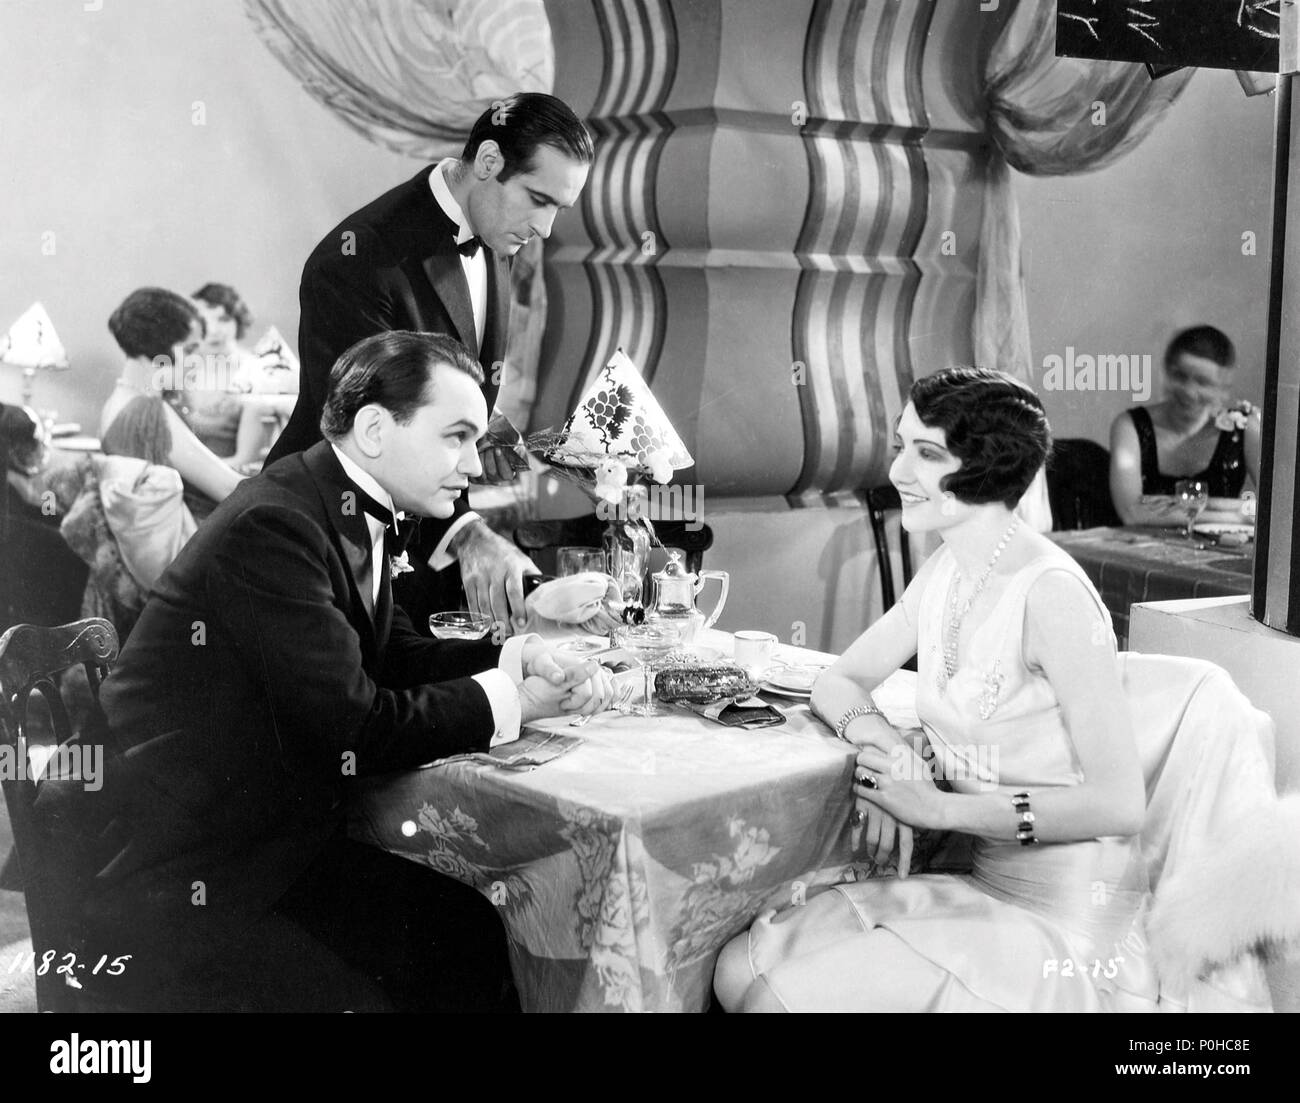 Original Film Title: THE HOLE IN THE WALL.  English Title: THE HOLE IN THE WALL.  Film Director: ROBERT FLOREY.  Year: 1929.  Stars: CLAUDETTE COLBERT; EDWARD G. ROBINSON. Credit: PARAMOUNT PICTURES / Album Stock Photo